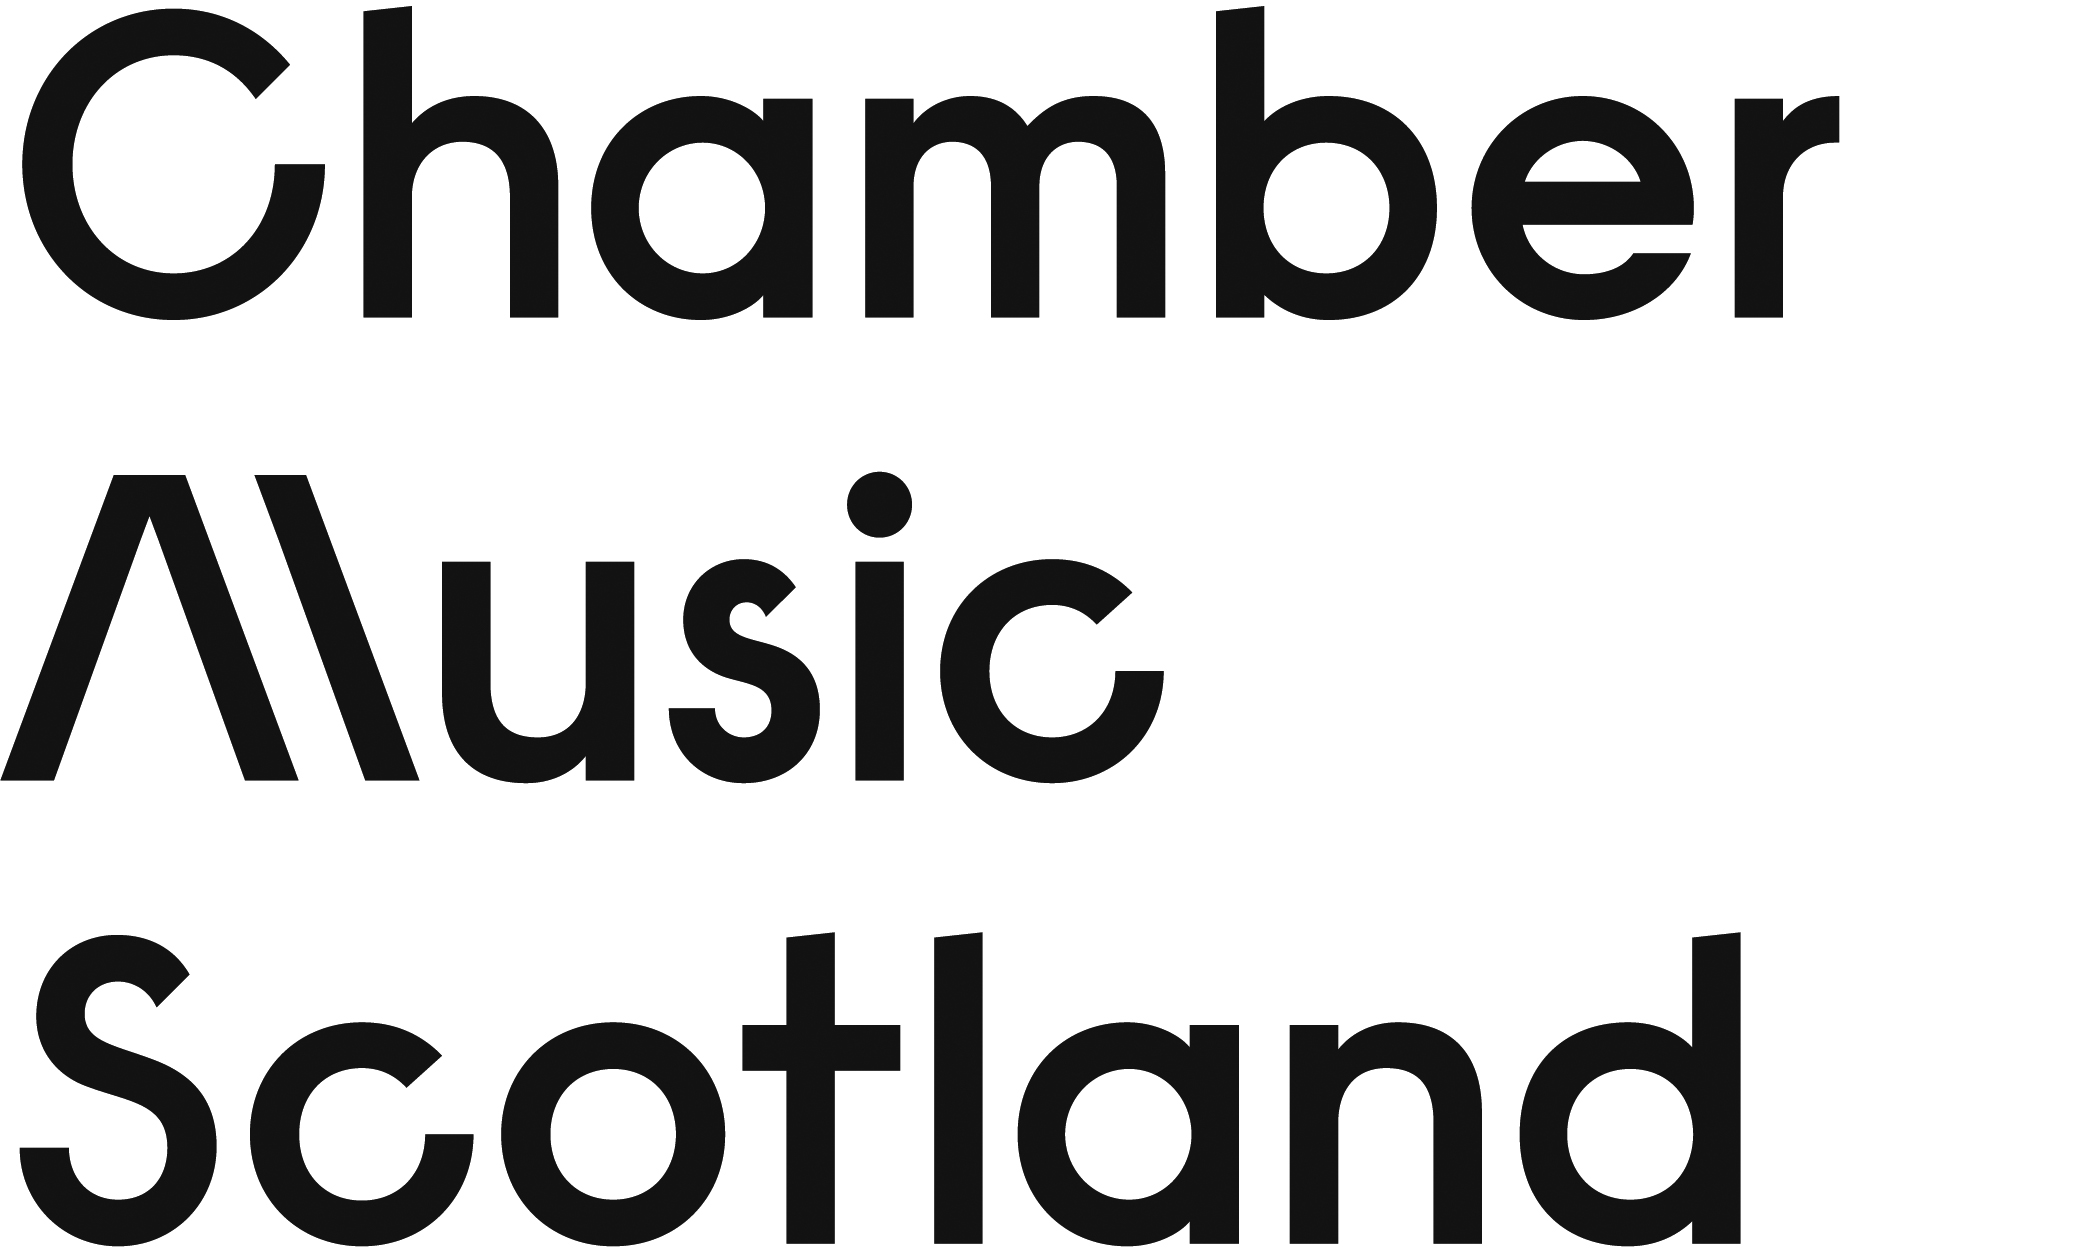 A square logo saying Chamber Music Scotland in black text